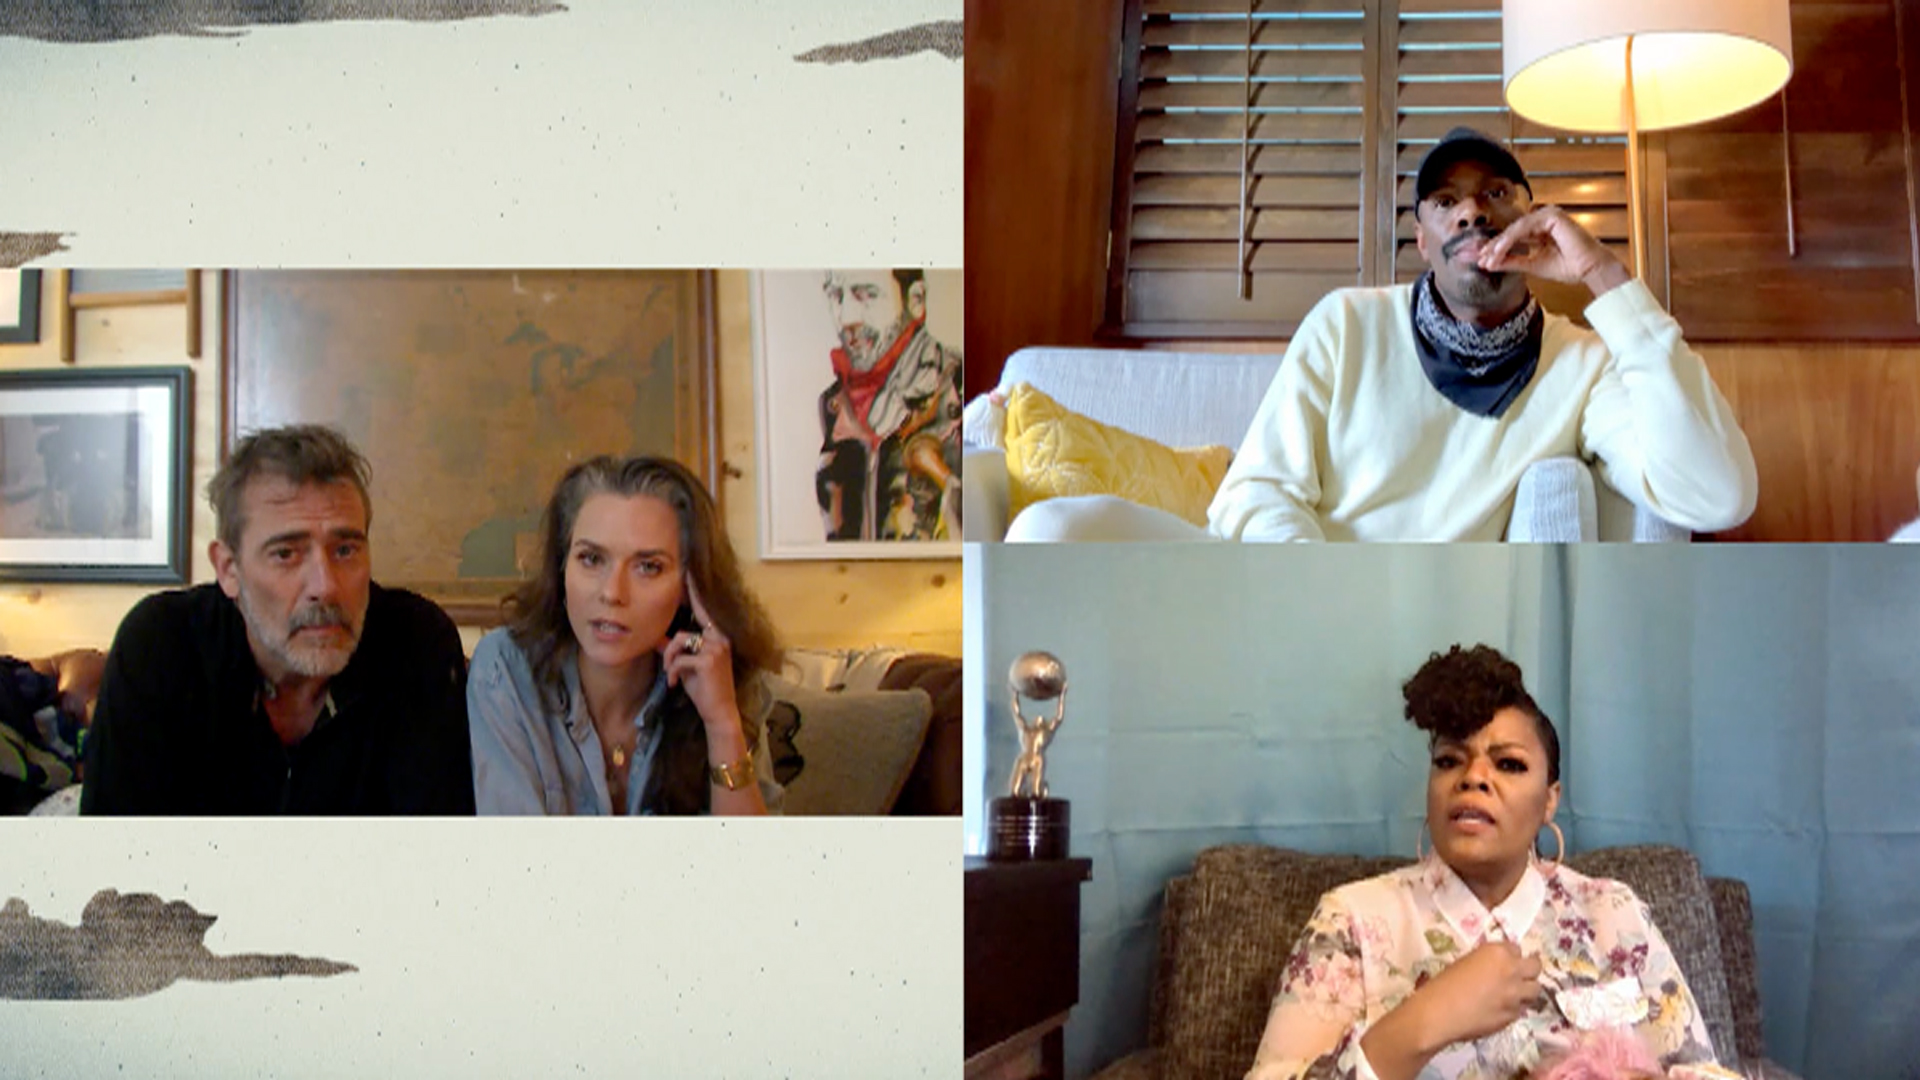 Friday Night In With the Morgans Episode 9 Clip: How to Be an Ally, Colman Domingo and Yvette Nicole Brown chat with the Morgans about how white people can be better allies to the Black Lives Matter movement. Plus, how to talk to your children about racism and steps to take to be anti-racist with family and friends.